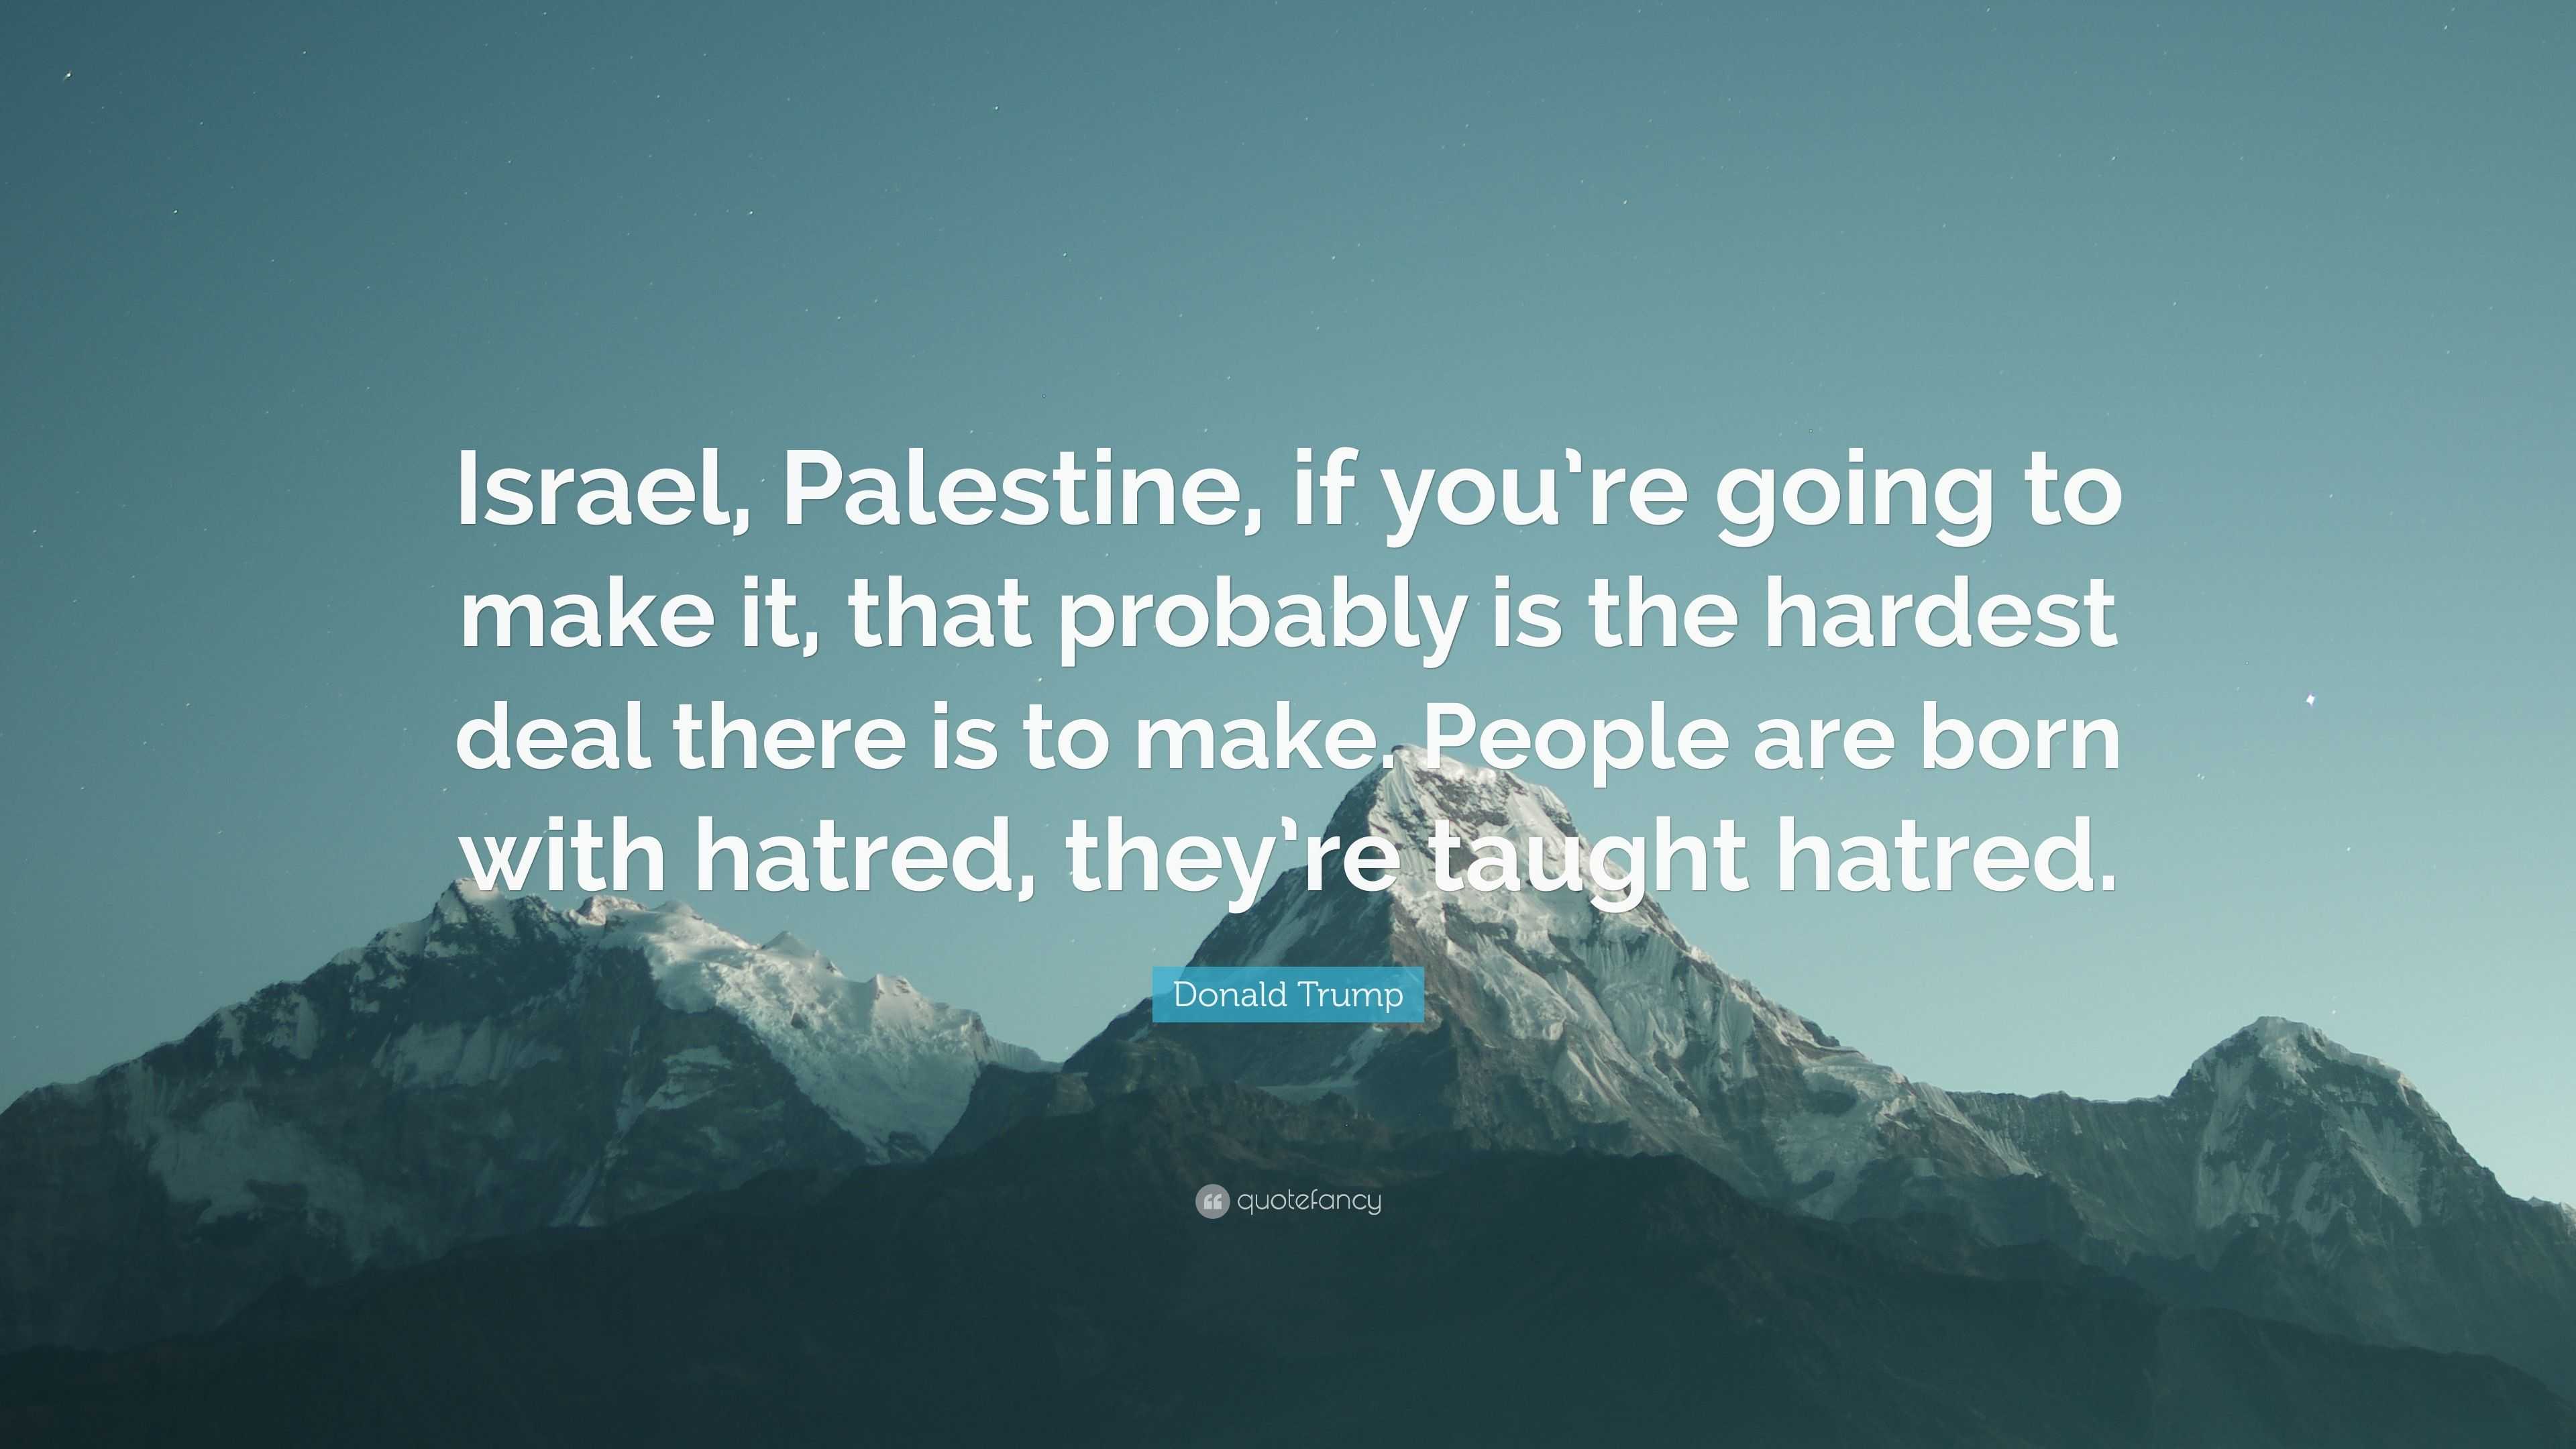 quotes about israel palestine conflict